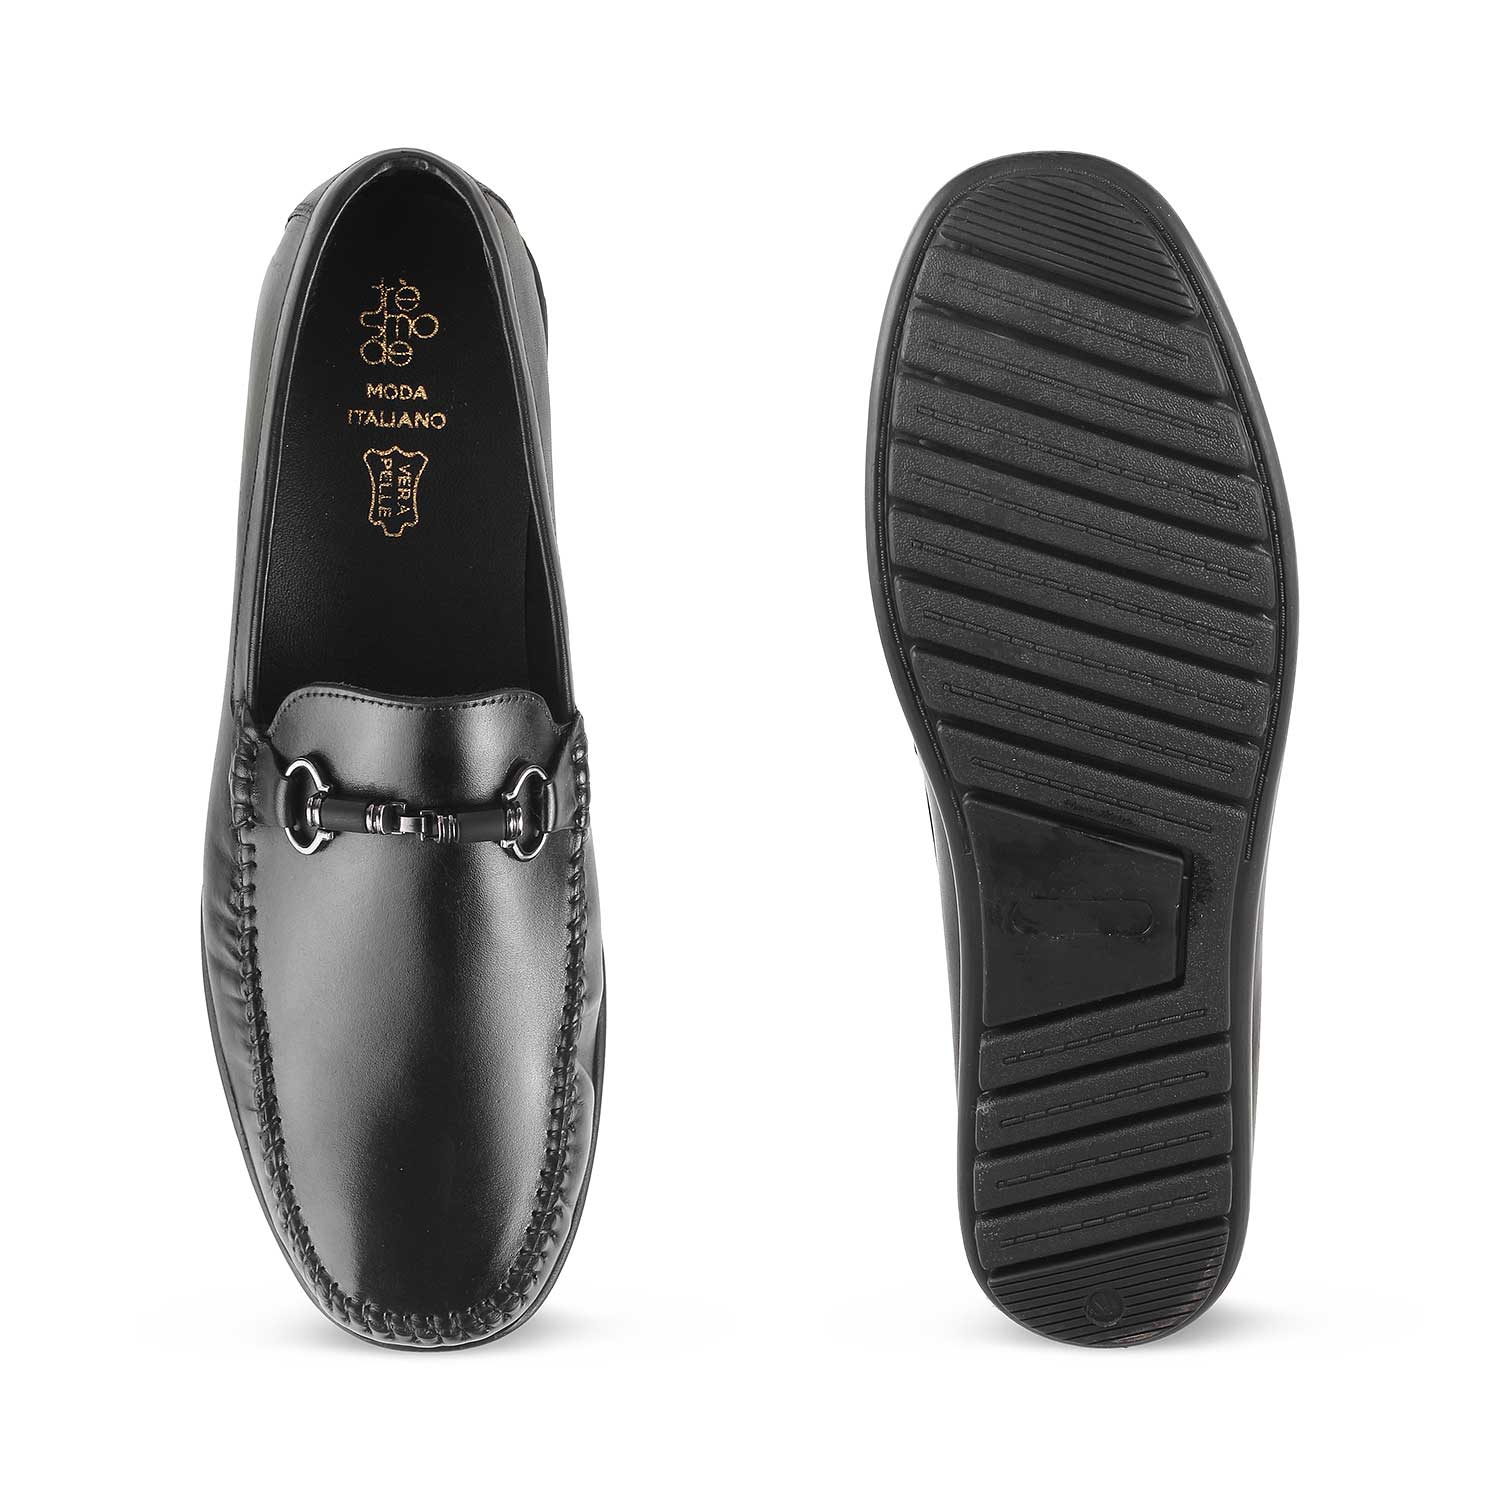 Tresmode-The Freccia Black Men's Leather Driving Loafers Tresmode-Tresmode